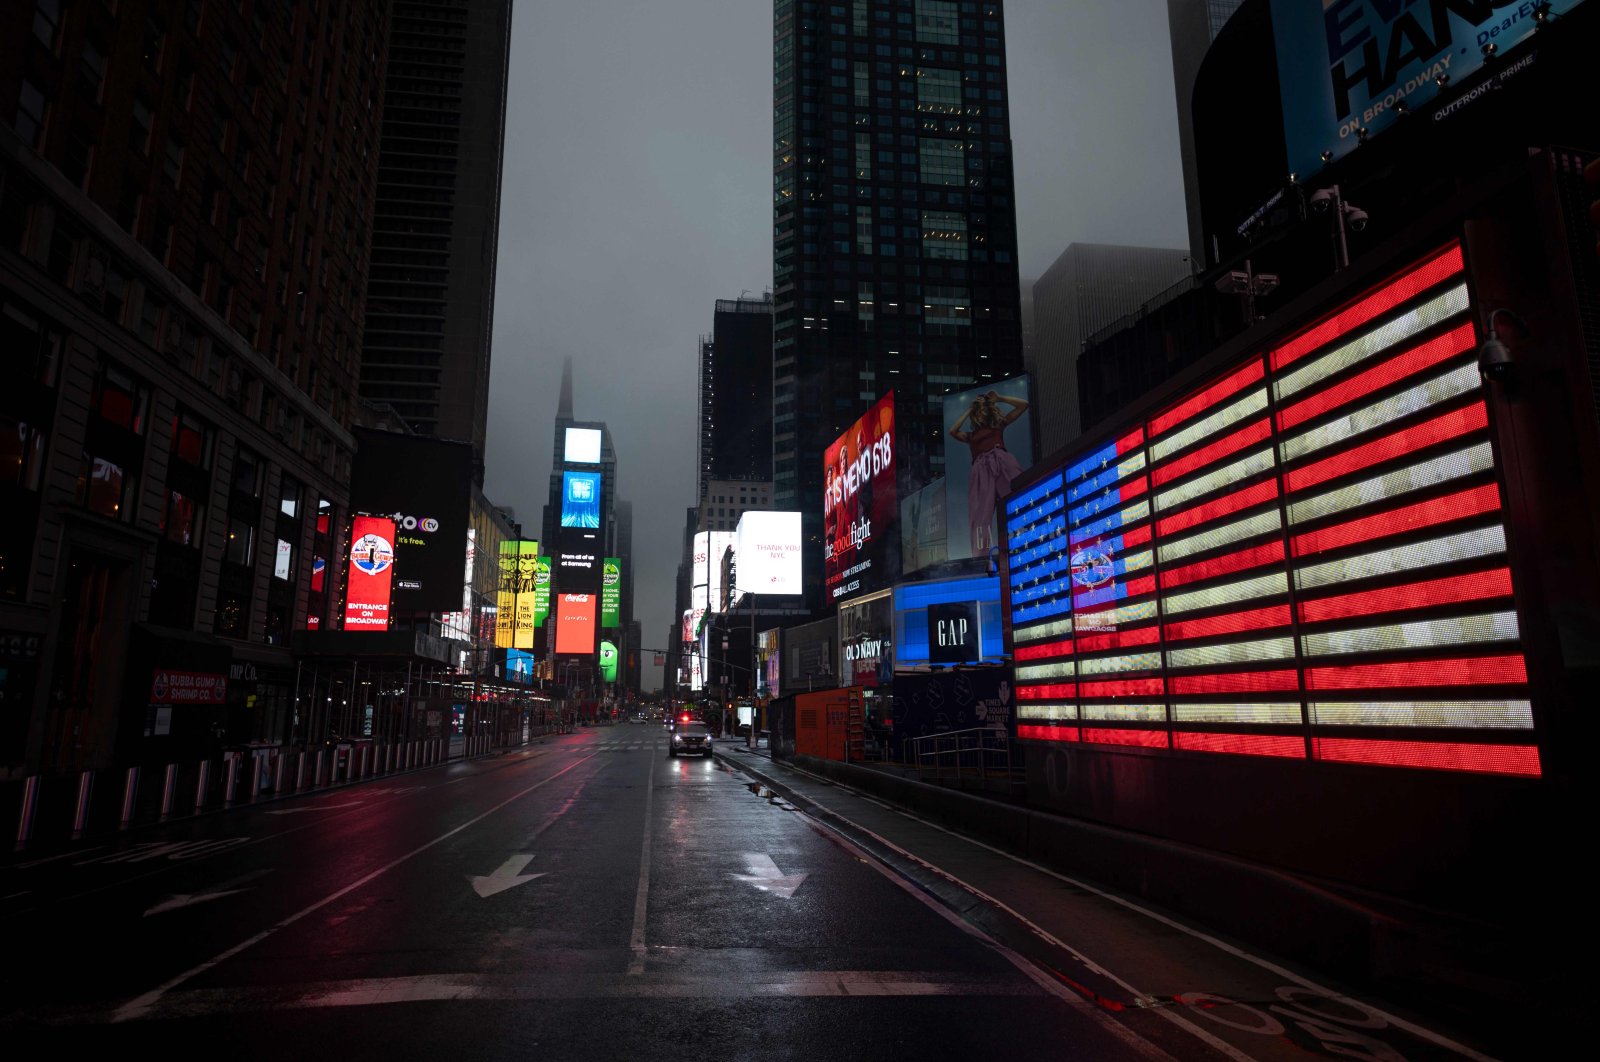 The U.S. Flag illuminates a street in Times Square amid the COVID-19 pandemic, in New York City, April 30, 2020. (AFP Photo)